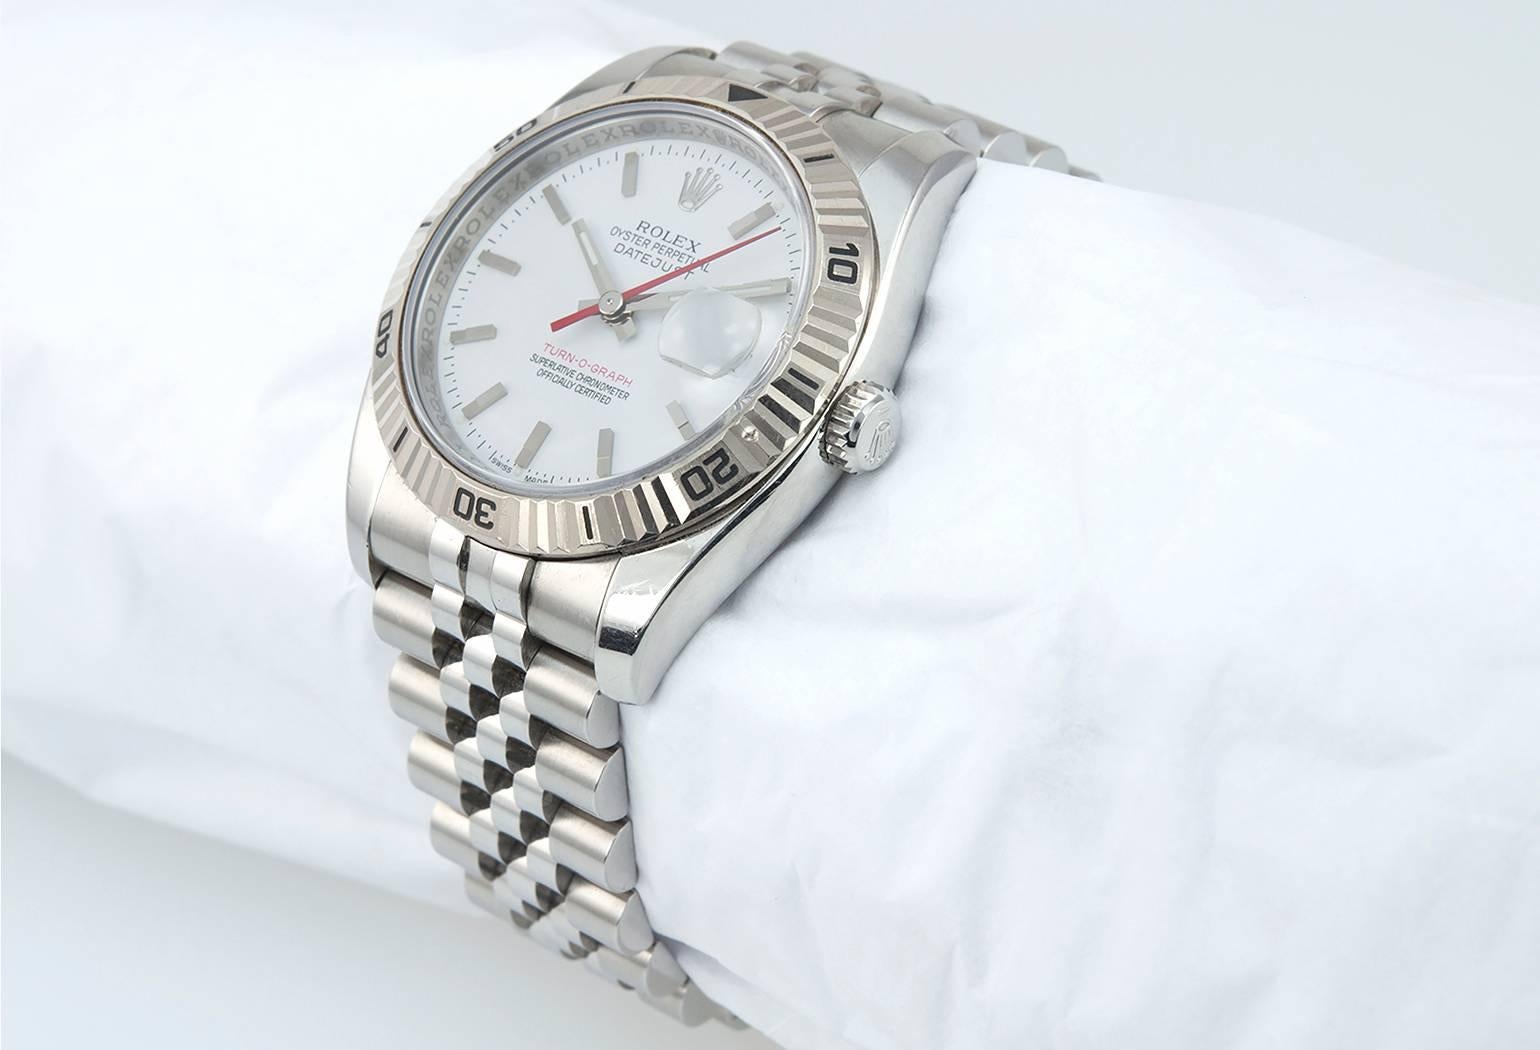 Rolex DateJust Turn-O-graph watch in stainless steel reference 116264. This Rolex features a 18 karat white gold fluted bezel, sapphire crystal, white dial with a red date and red seconds hand, a locking waterproof crown, stainless steel case, and a